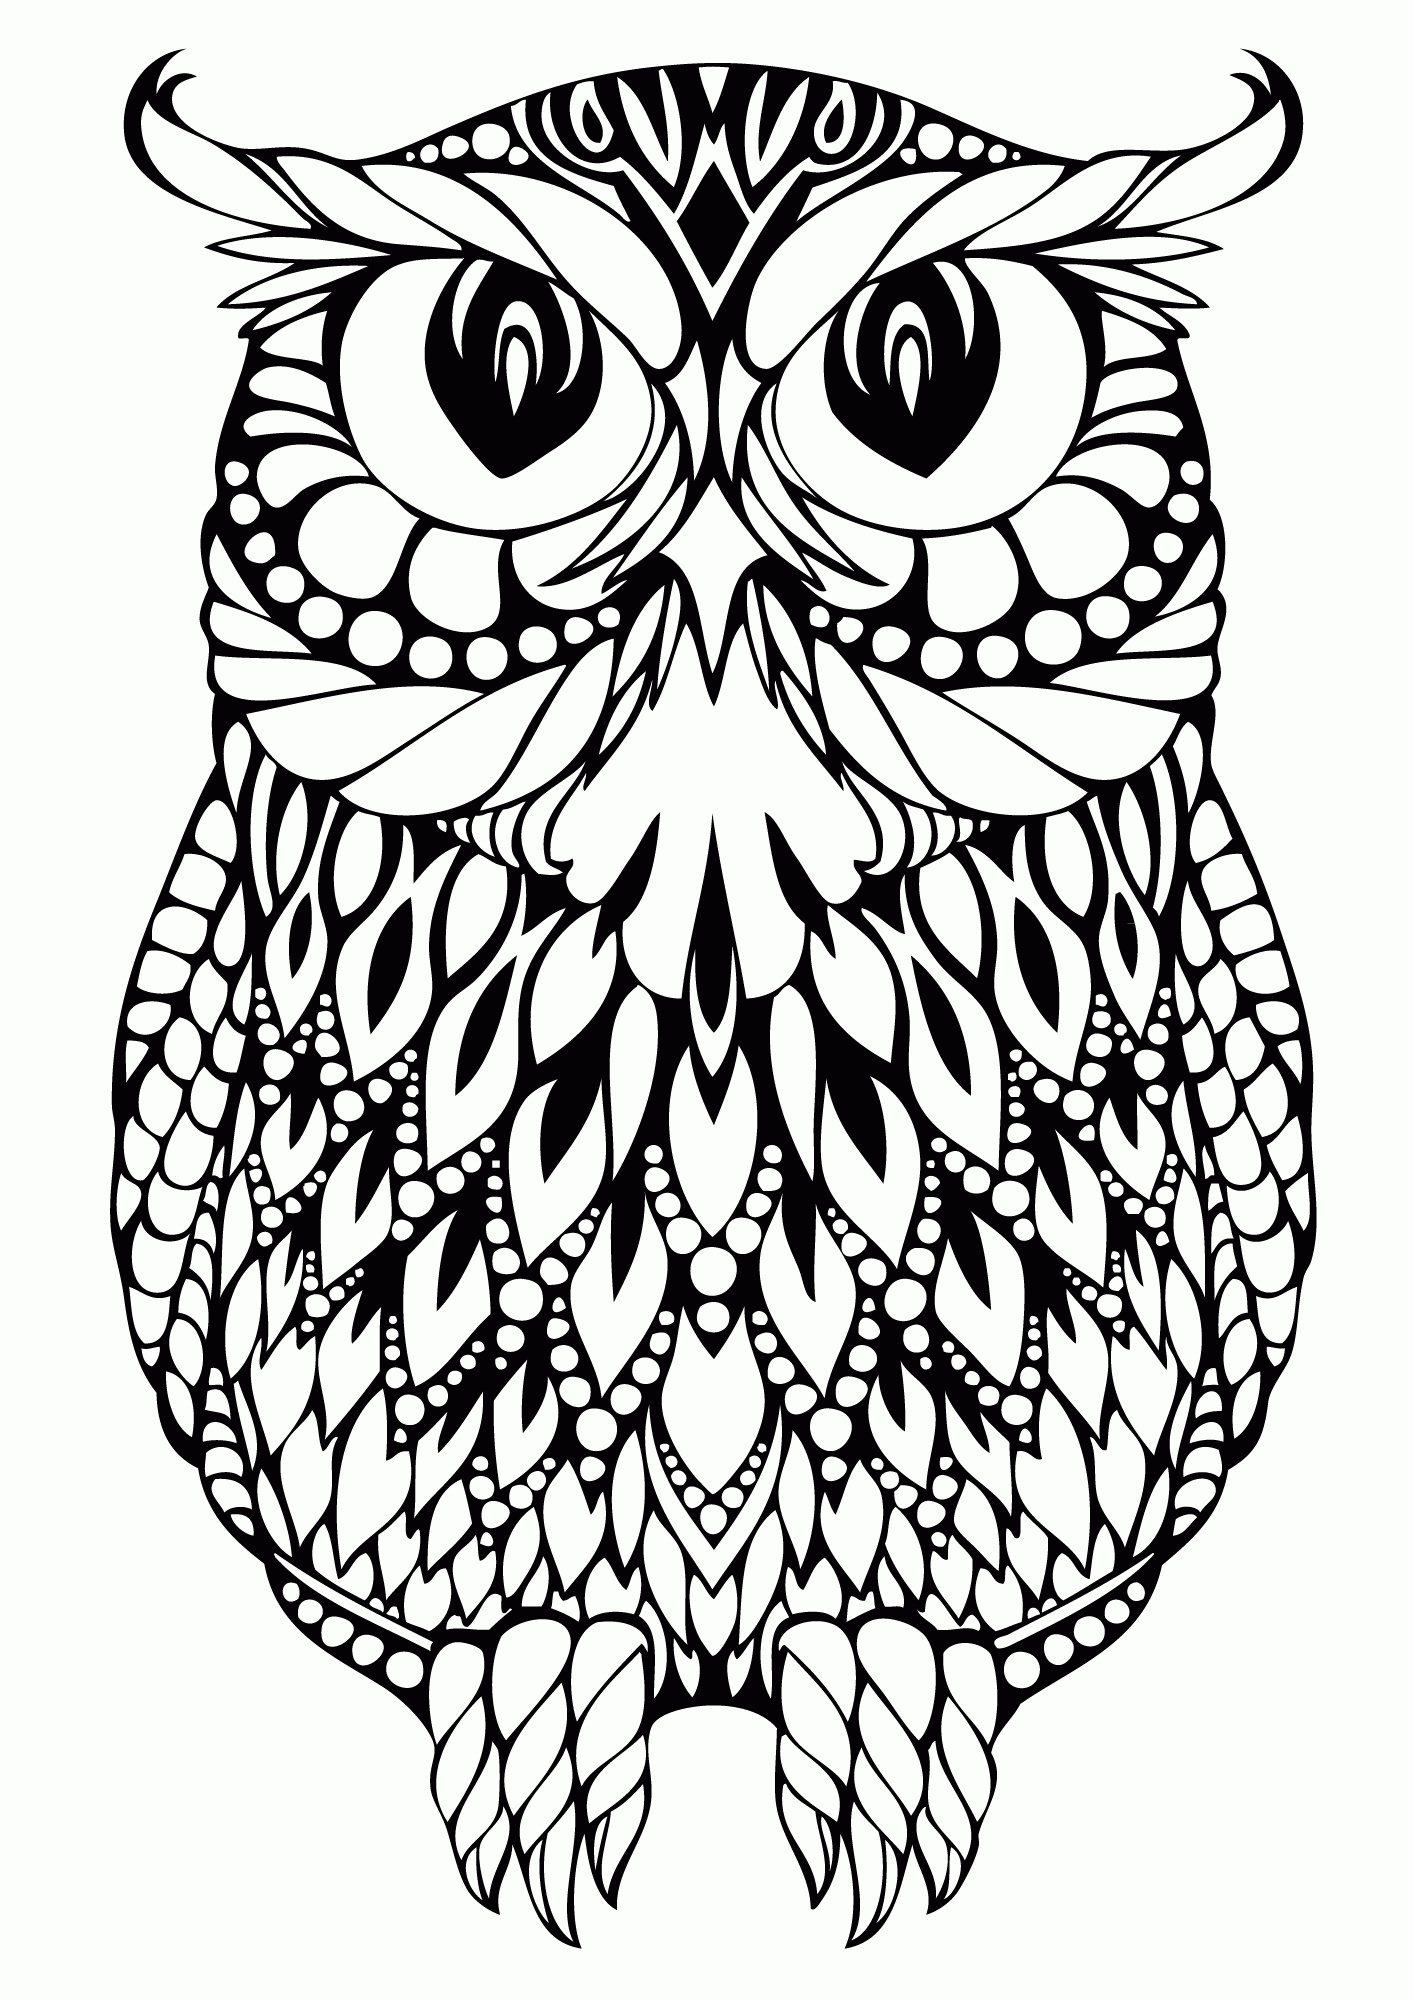 Free Printable Coloring Pictures Of Owls - Coloring